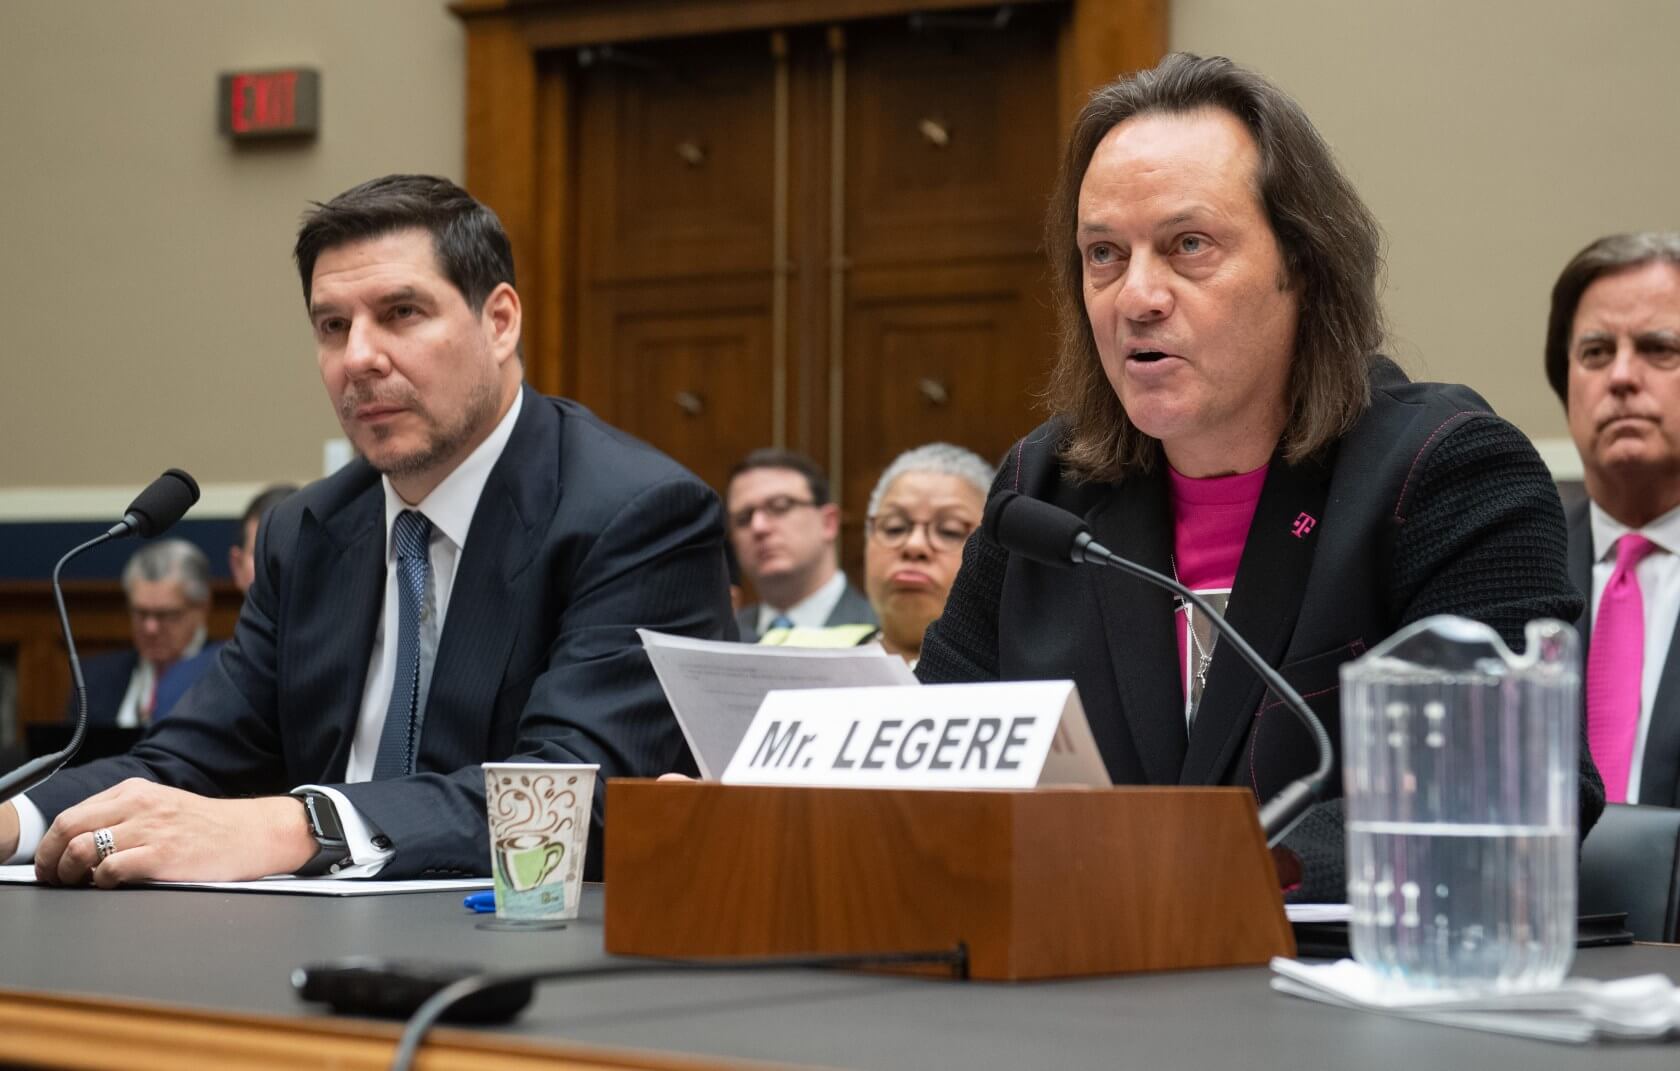 The DOJ is reportedly planning to approve the T-Mobile/Sprint merger